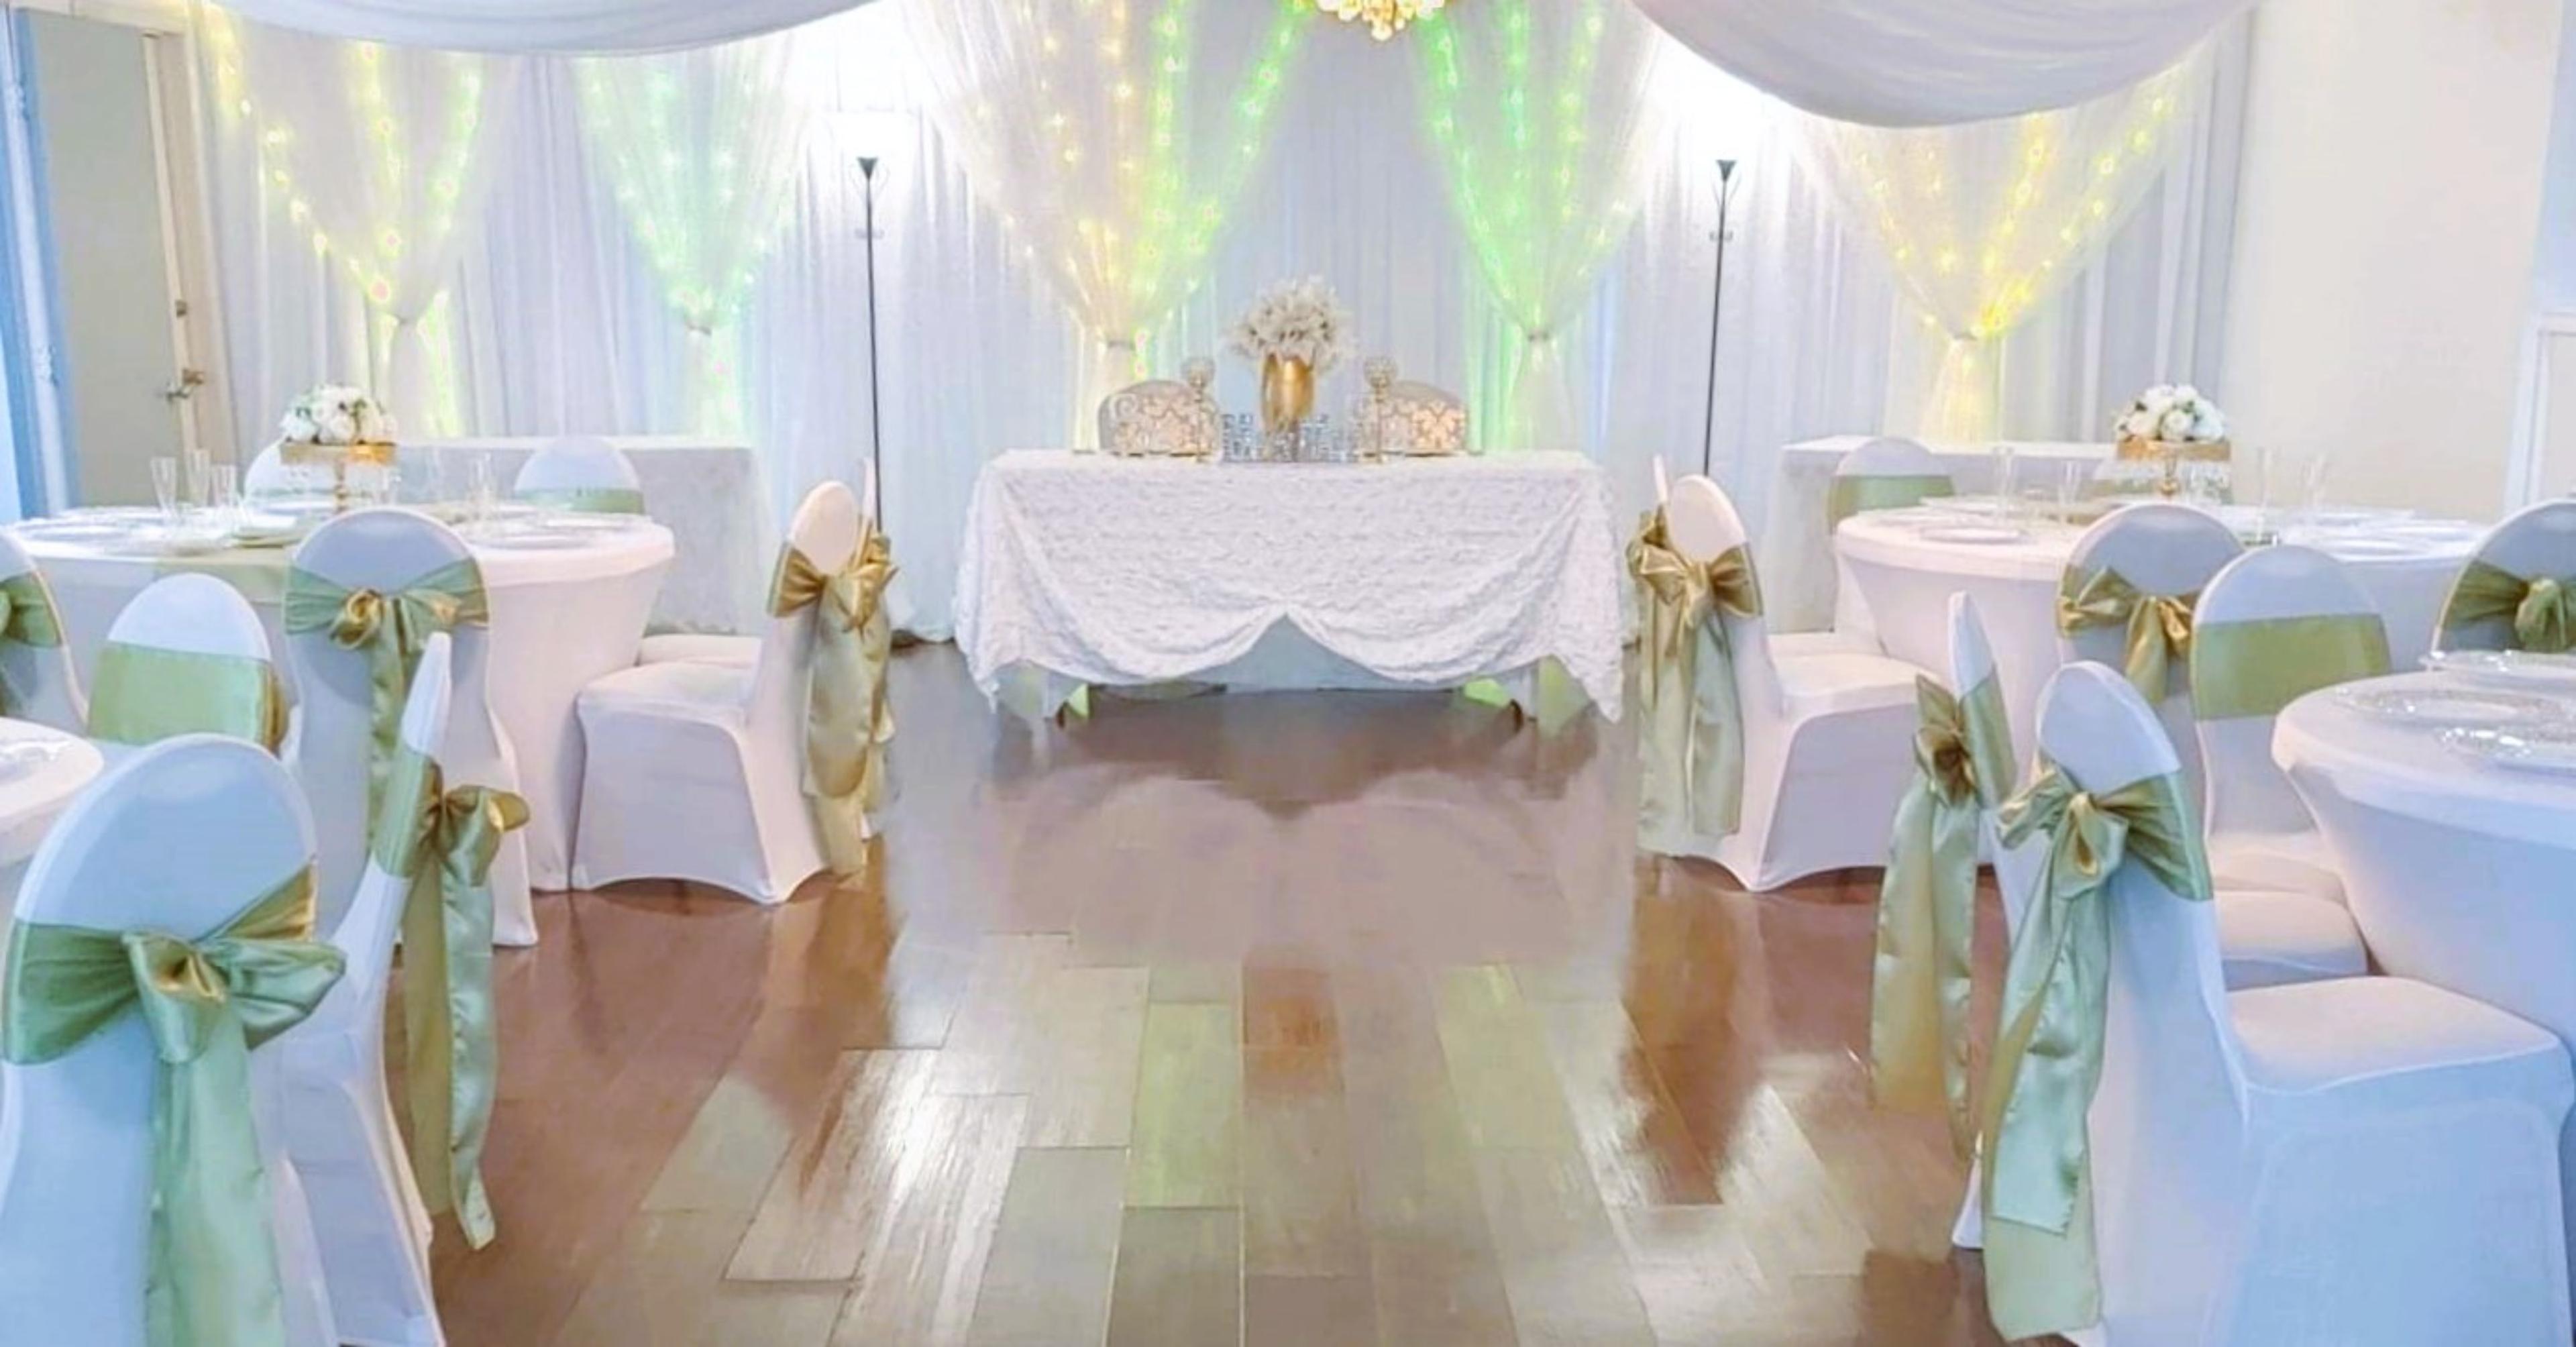 The Hideaway Banquet And Events Hall